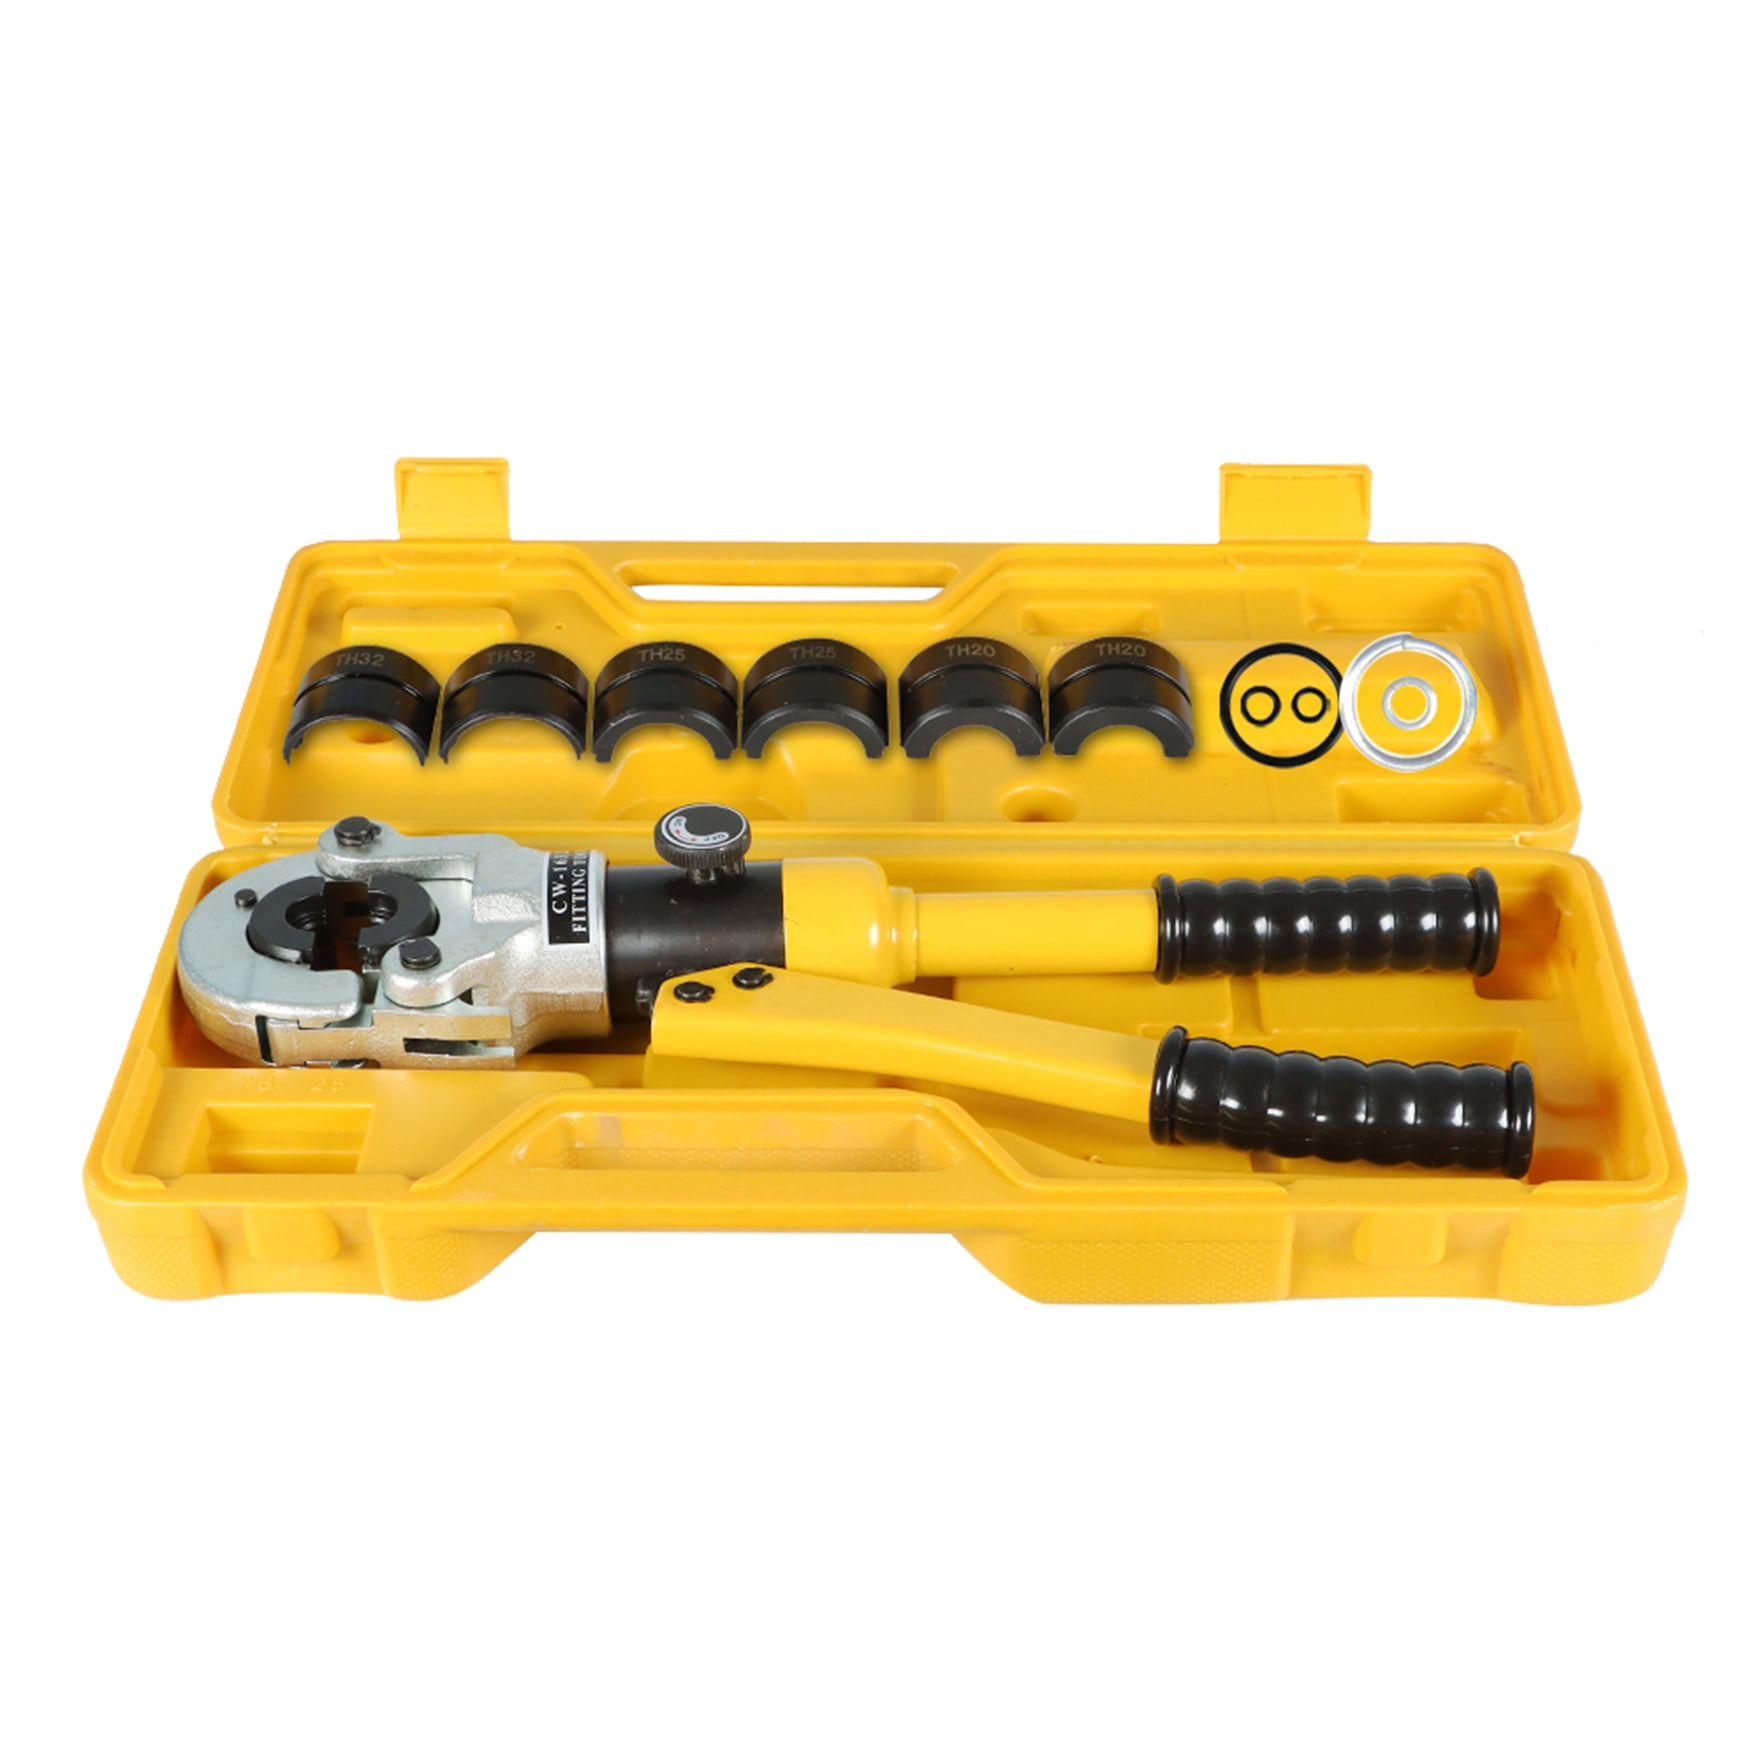 PEX Crimping Tool for sale online Yescom 25PCP001-C12-02 1/2 in 